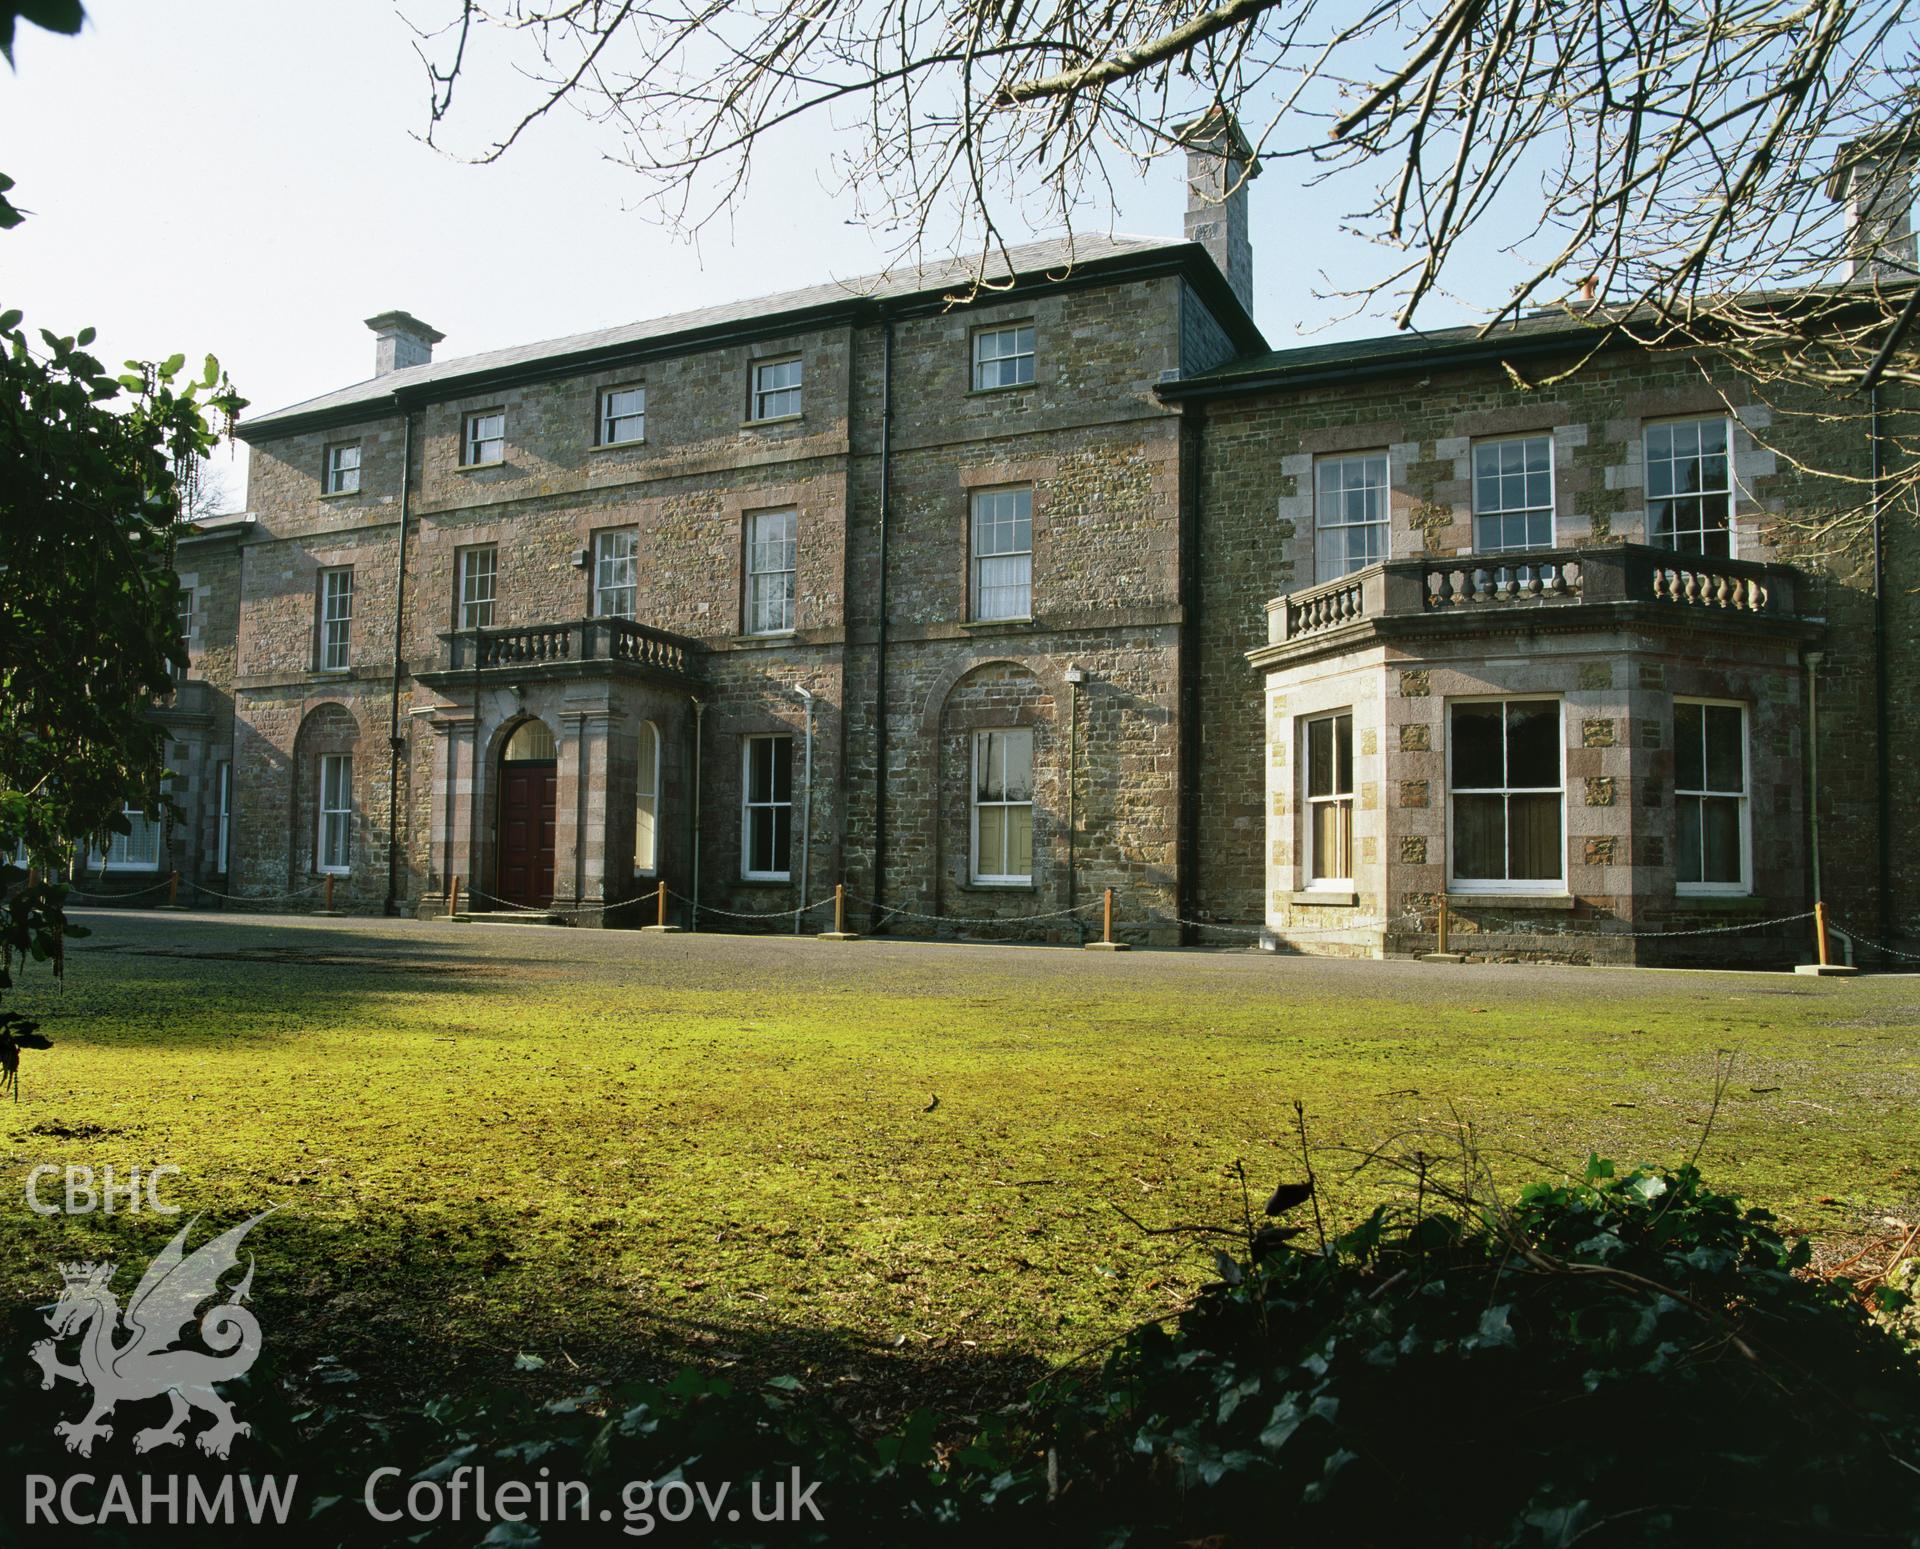 RCAHMW colour transparency showing exterior view of Cresselly House, taken by Iain Wright, 2003